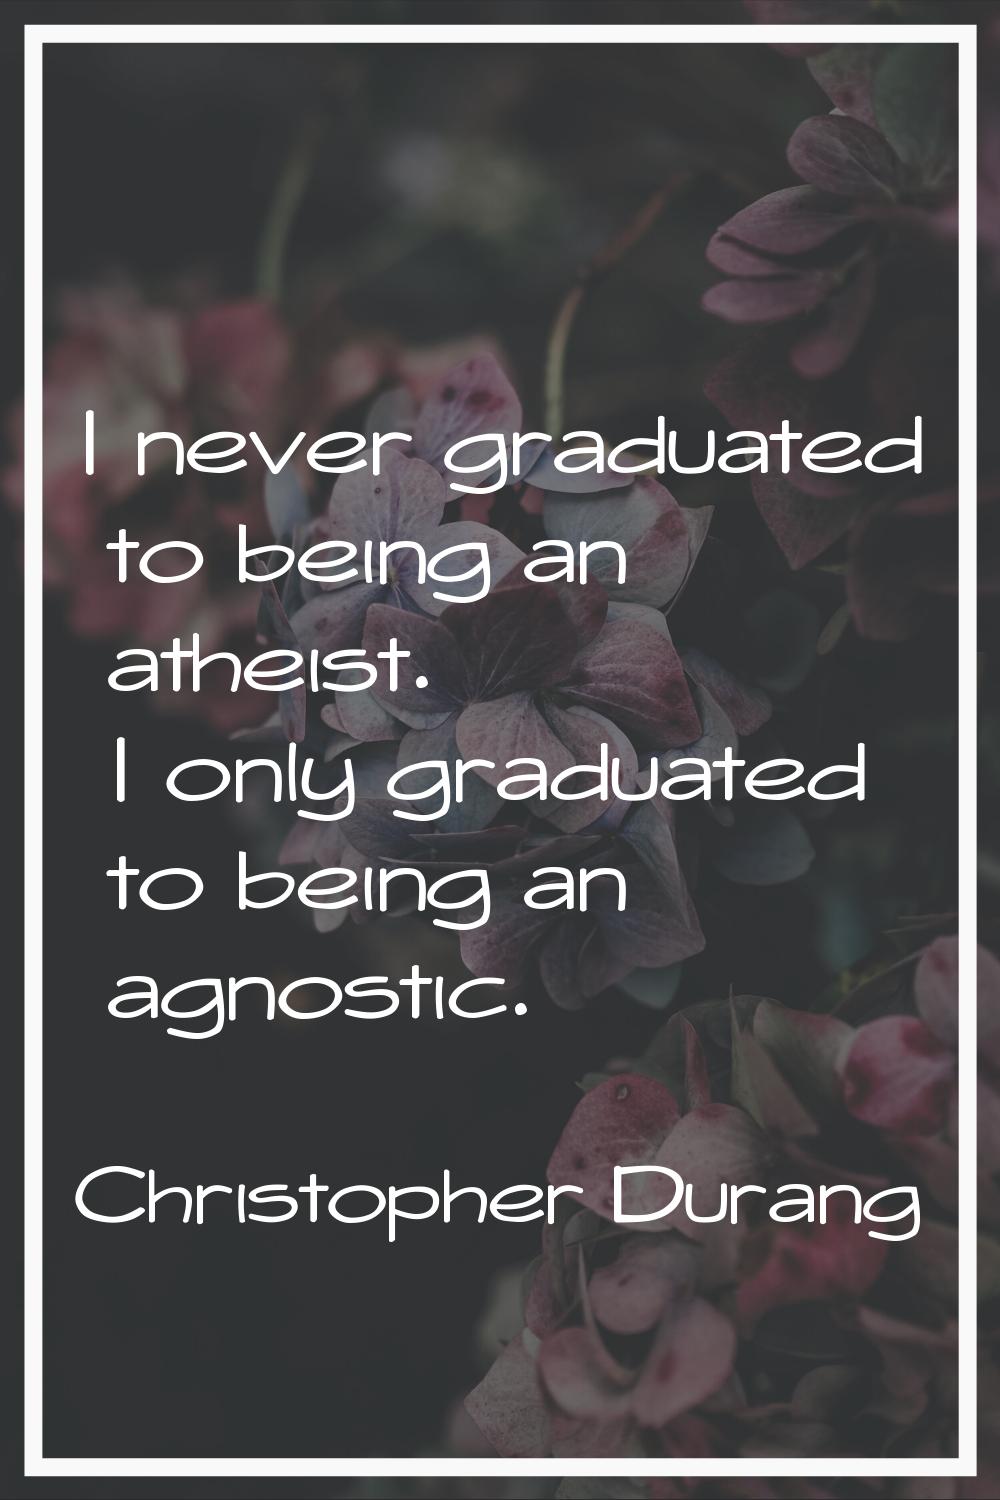 I never graduated to being an atheist. I only graduated to being an agnostic.